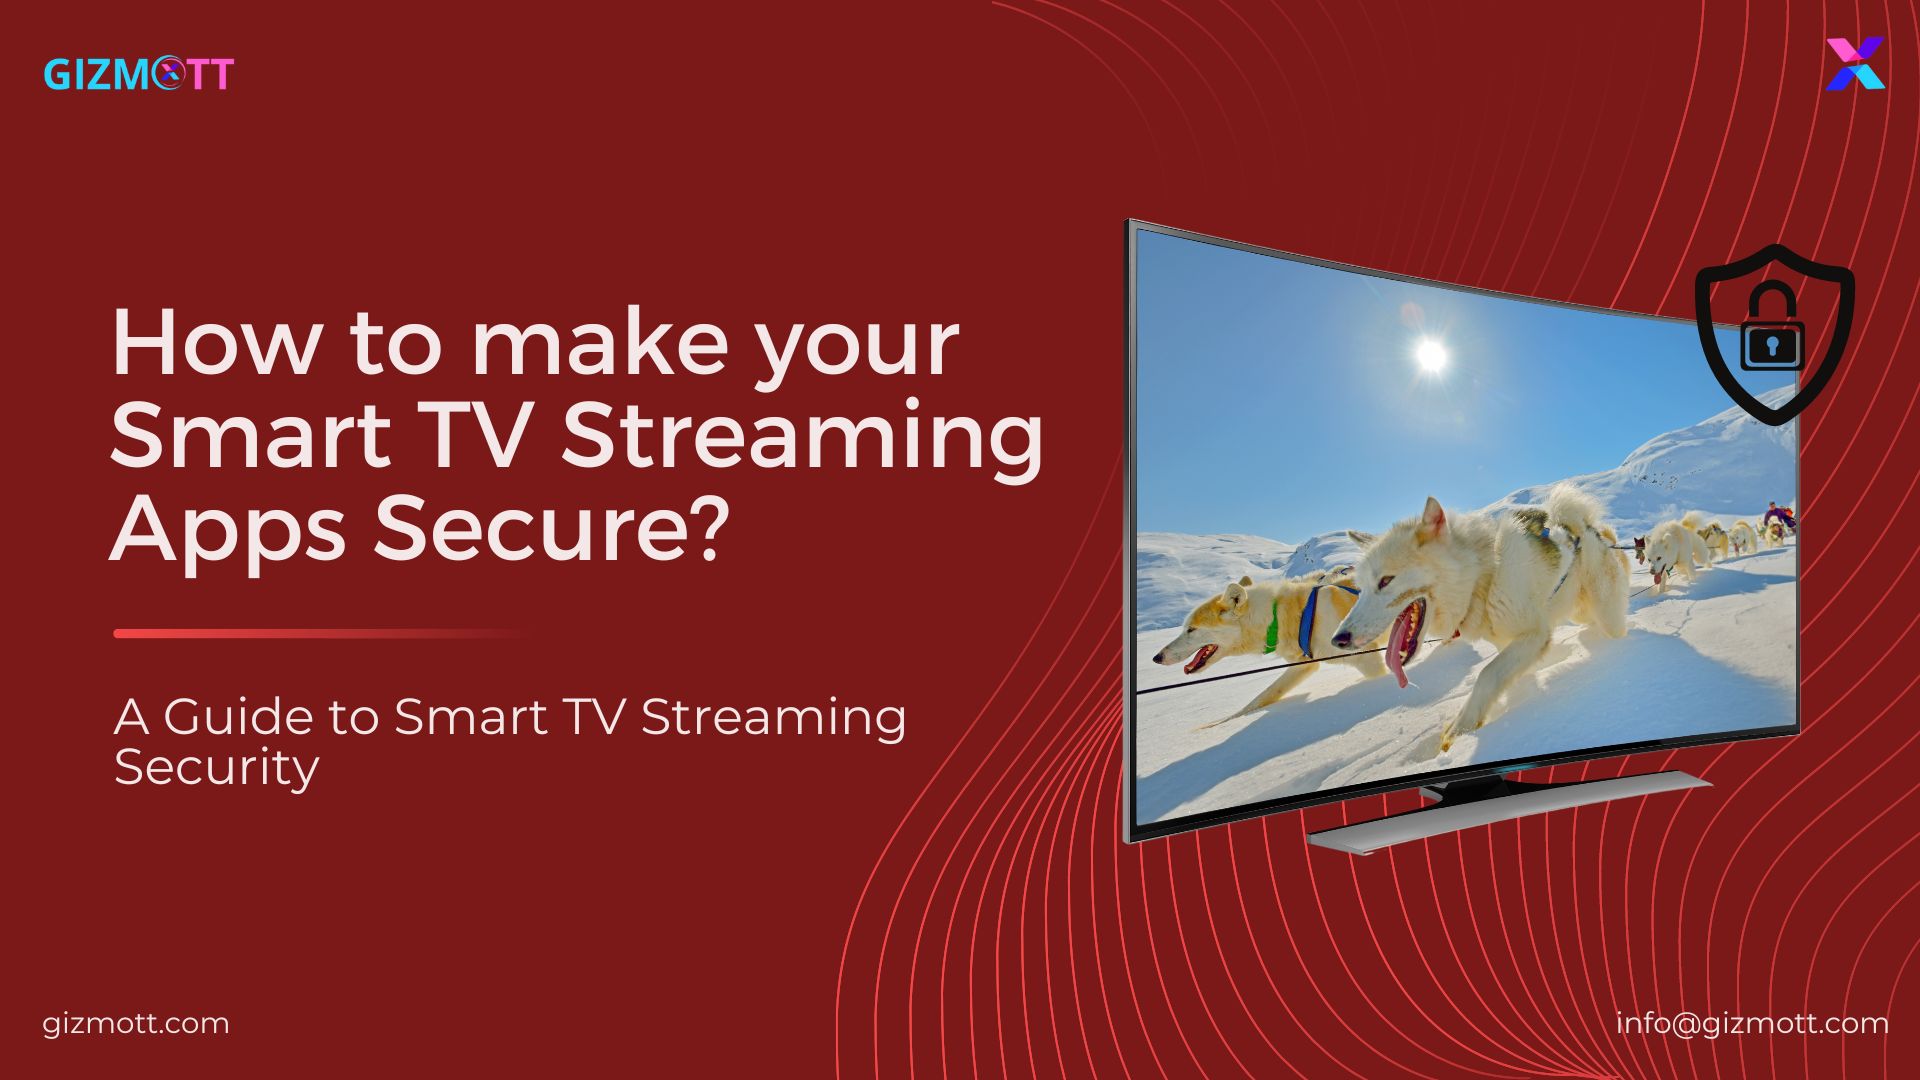 Empowering Secure Smart TV App Streaming with Gizmeon